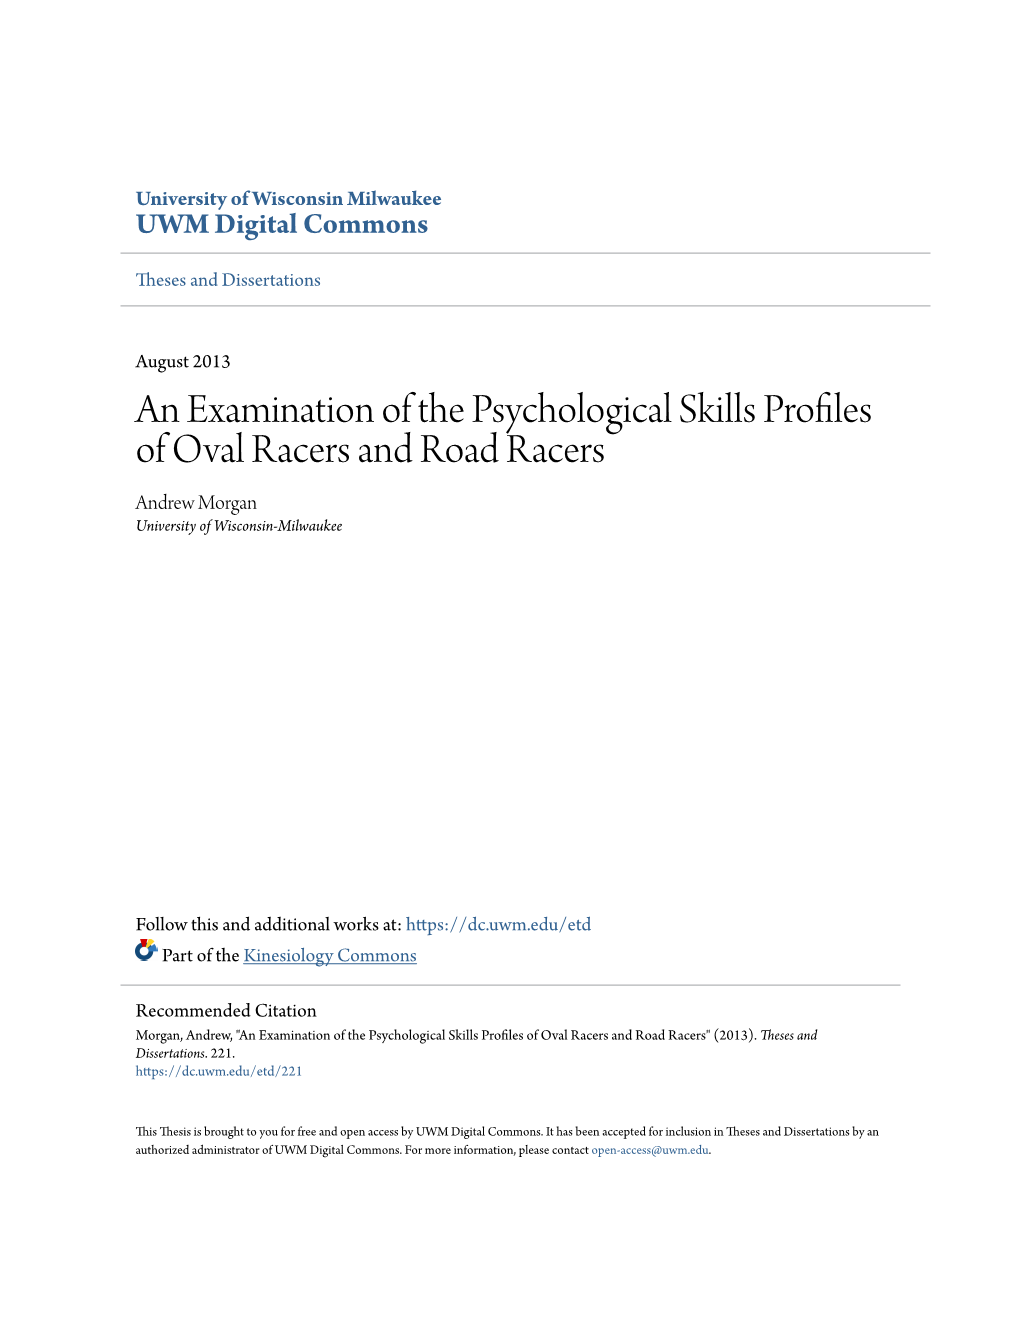 An Examination of the Psychological Skills Profiles of Oval Racers and Road Racers Andrew Morgan University of Wisconsin-Milwaukee